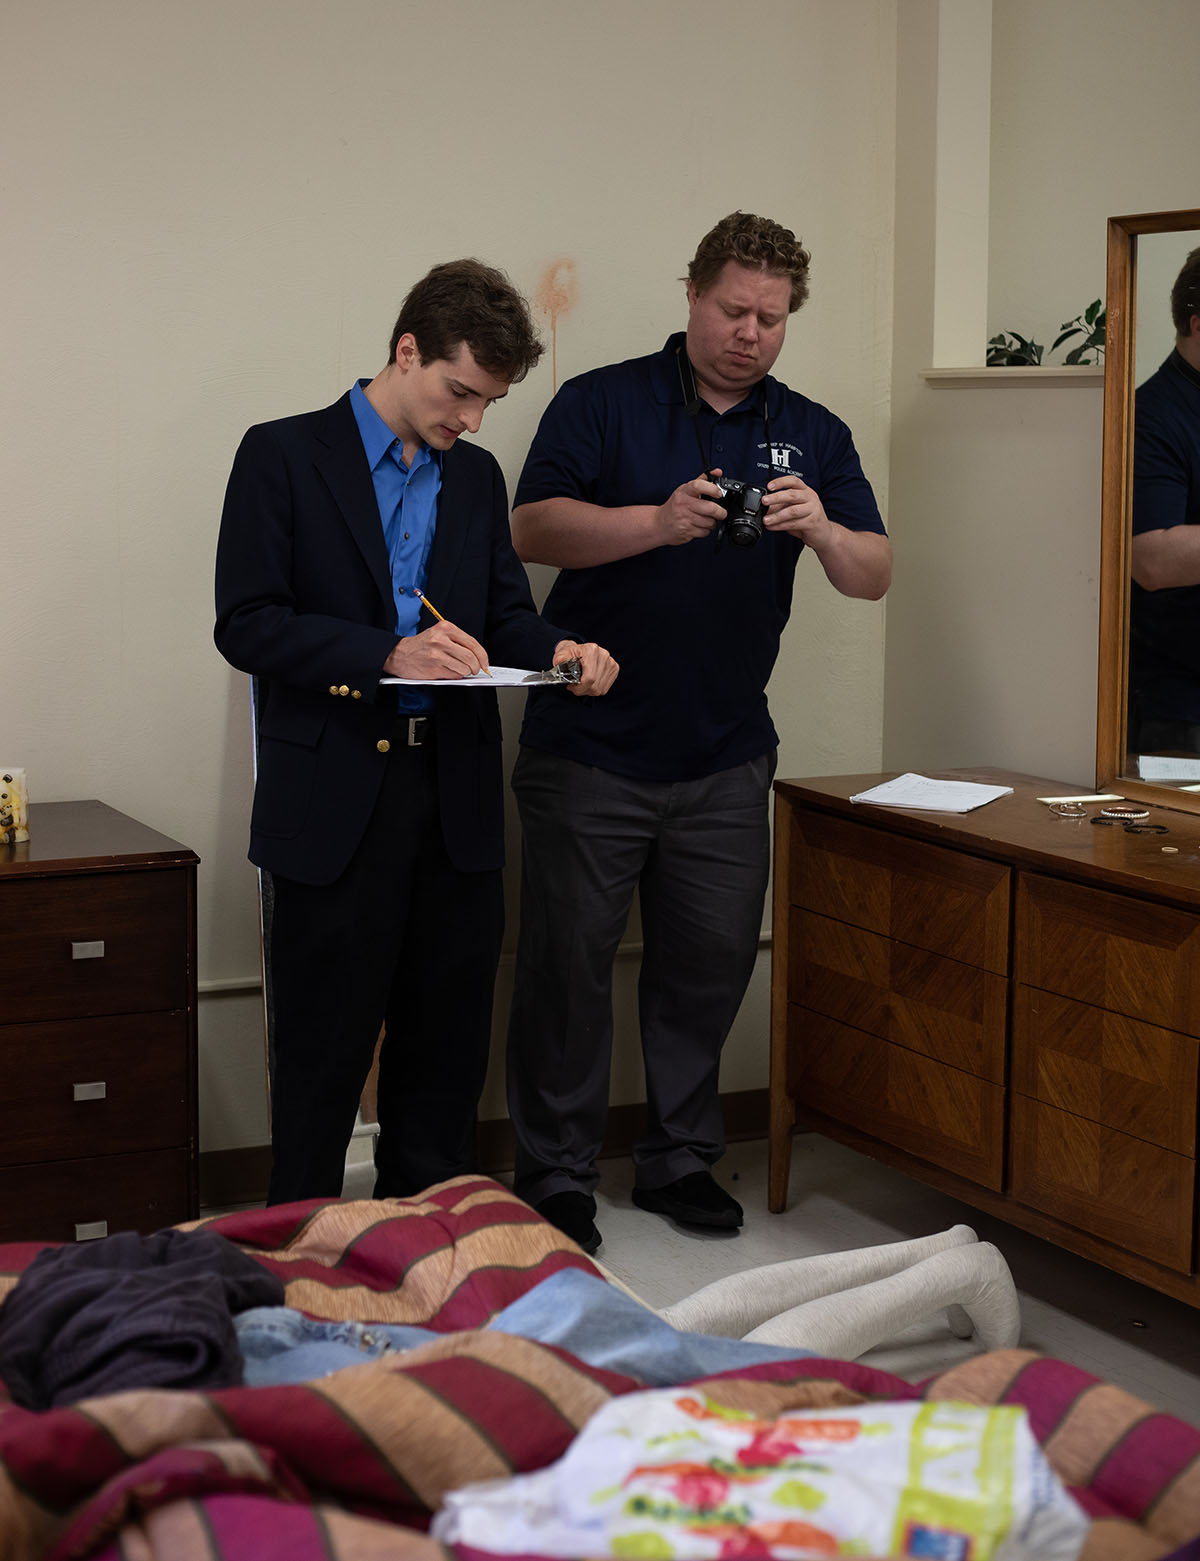 Pictured are members of the Hampton Township Citizens Police Academy at Point Park University's CSI House. Photo by Hannah Johnston.